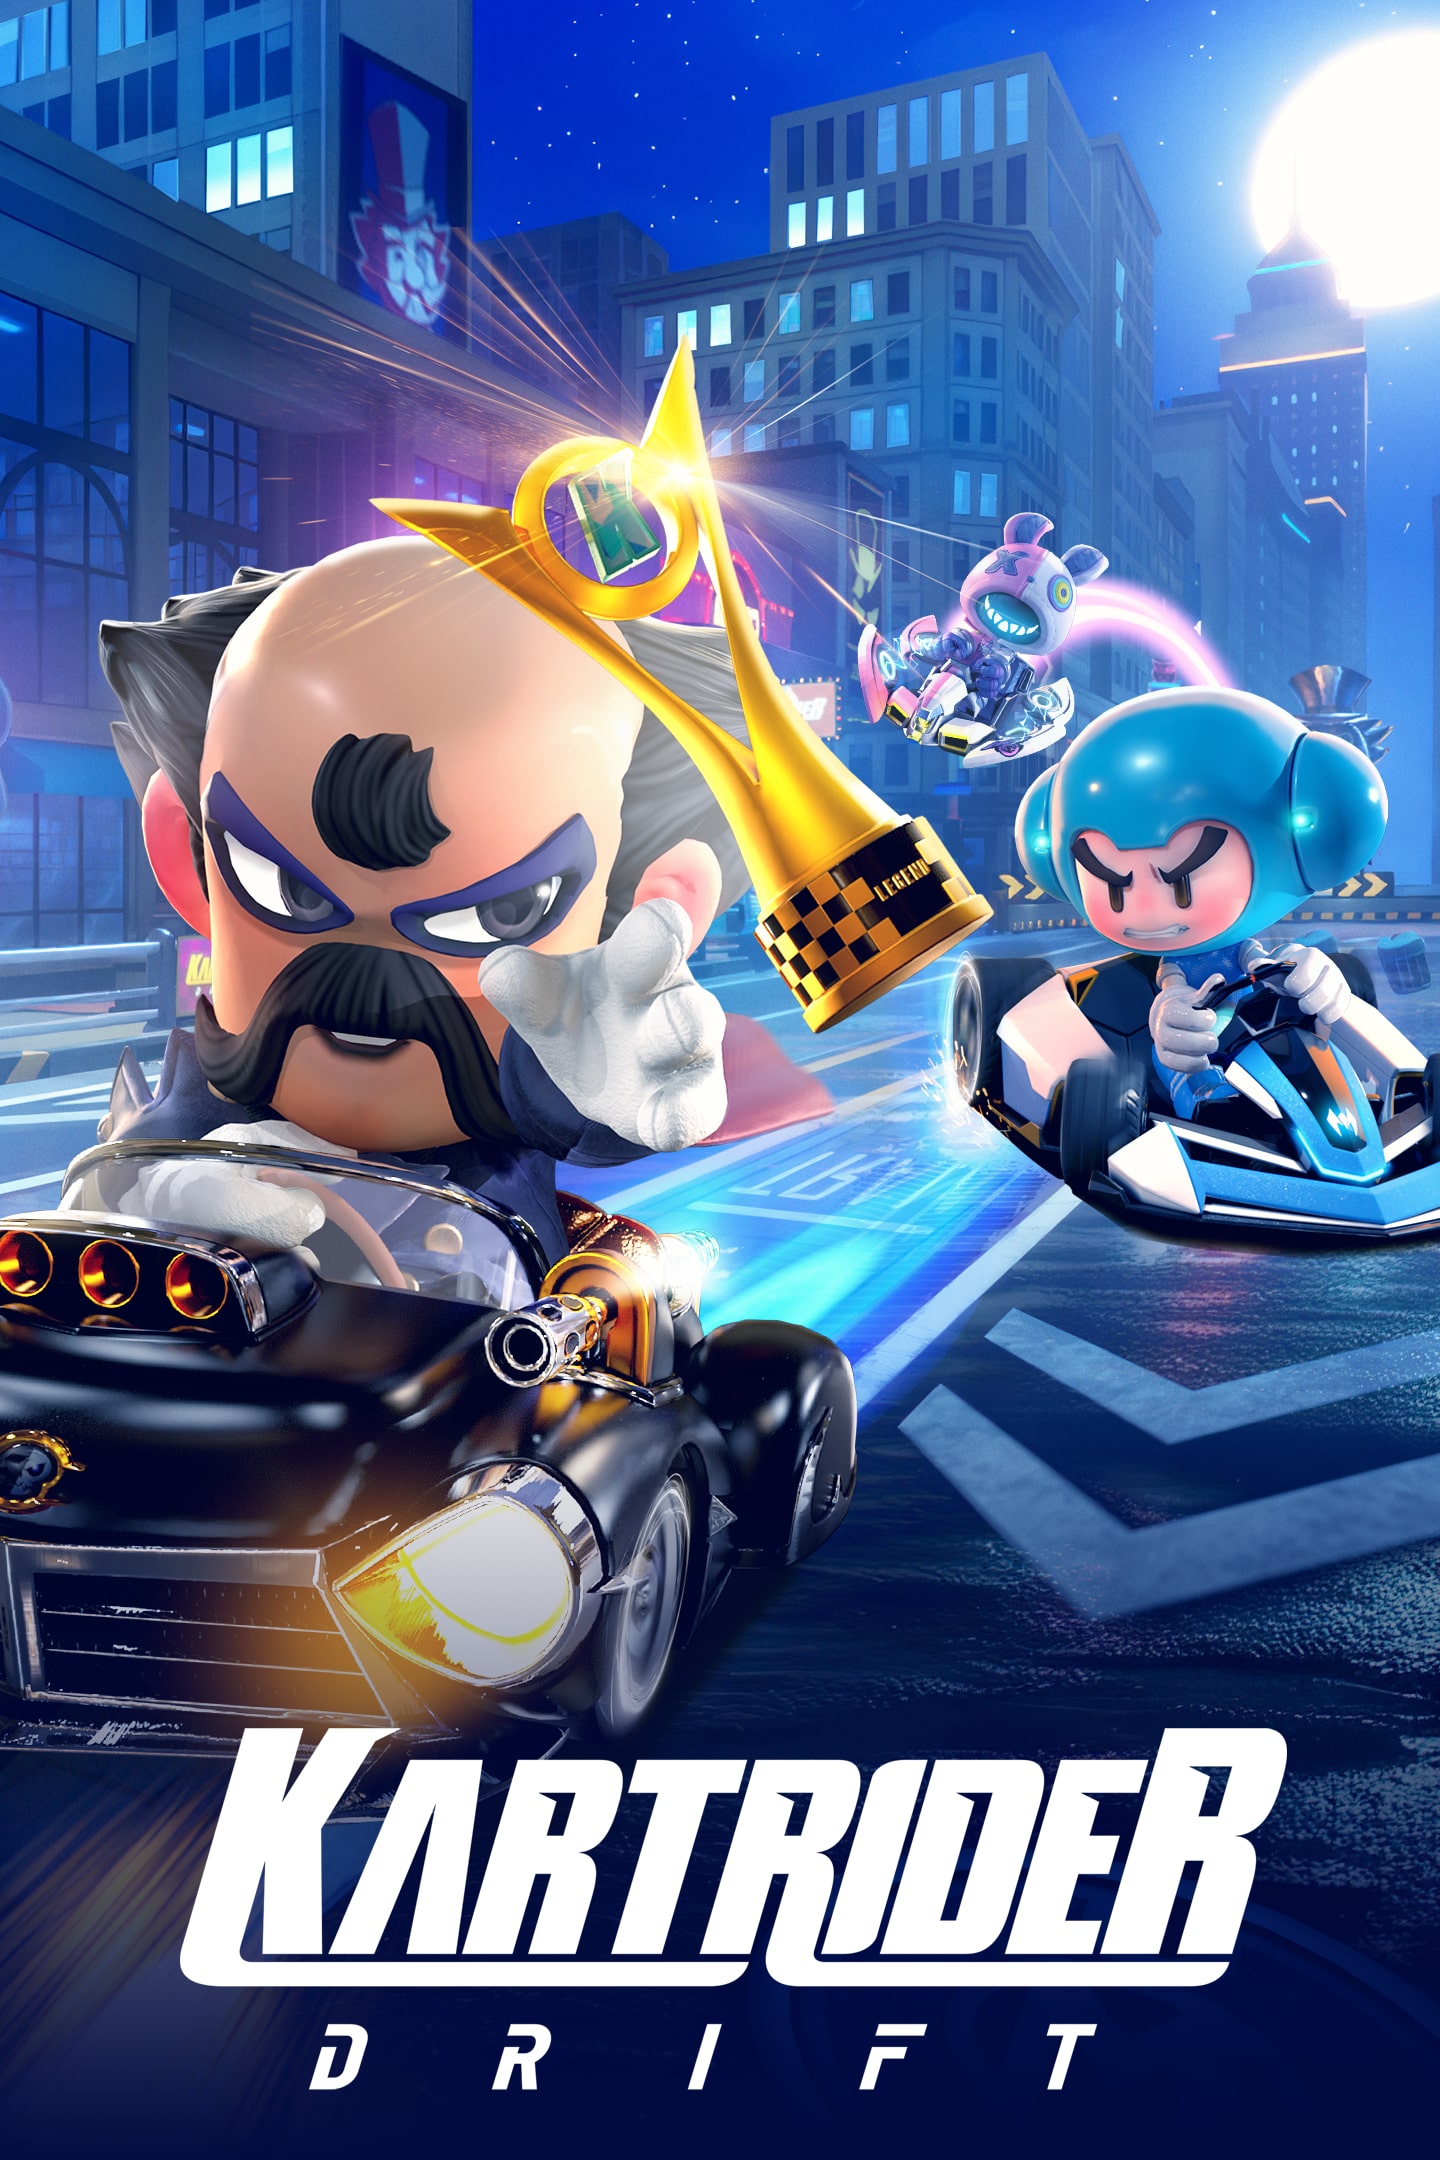 KartRider: Drift – a free-to-play kart racer – lands on PS4 and PS5 in 2022